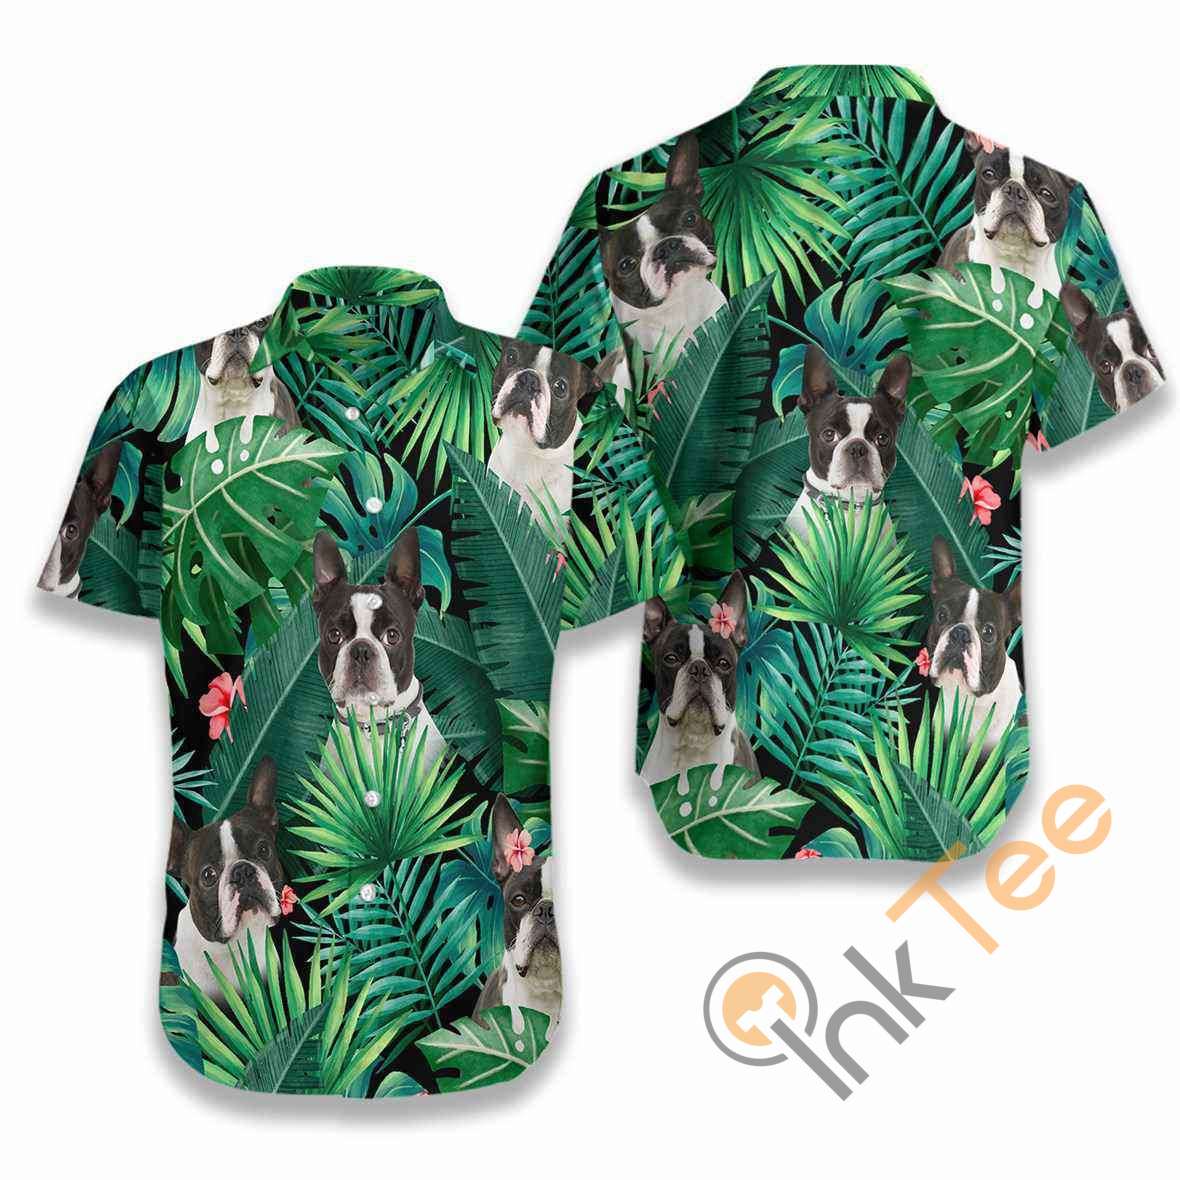 Boston Terrie Dog Tropical Cotton Casual Button Down Short Sleeves Hawaiian Shirt Unisex Full Print For Tropical Summer Vacation Full Size